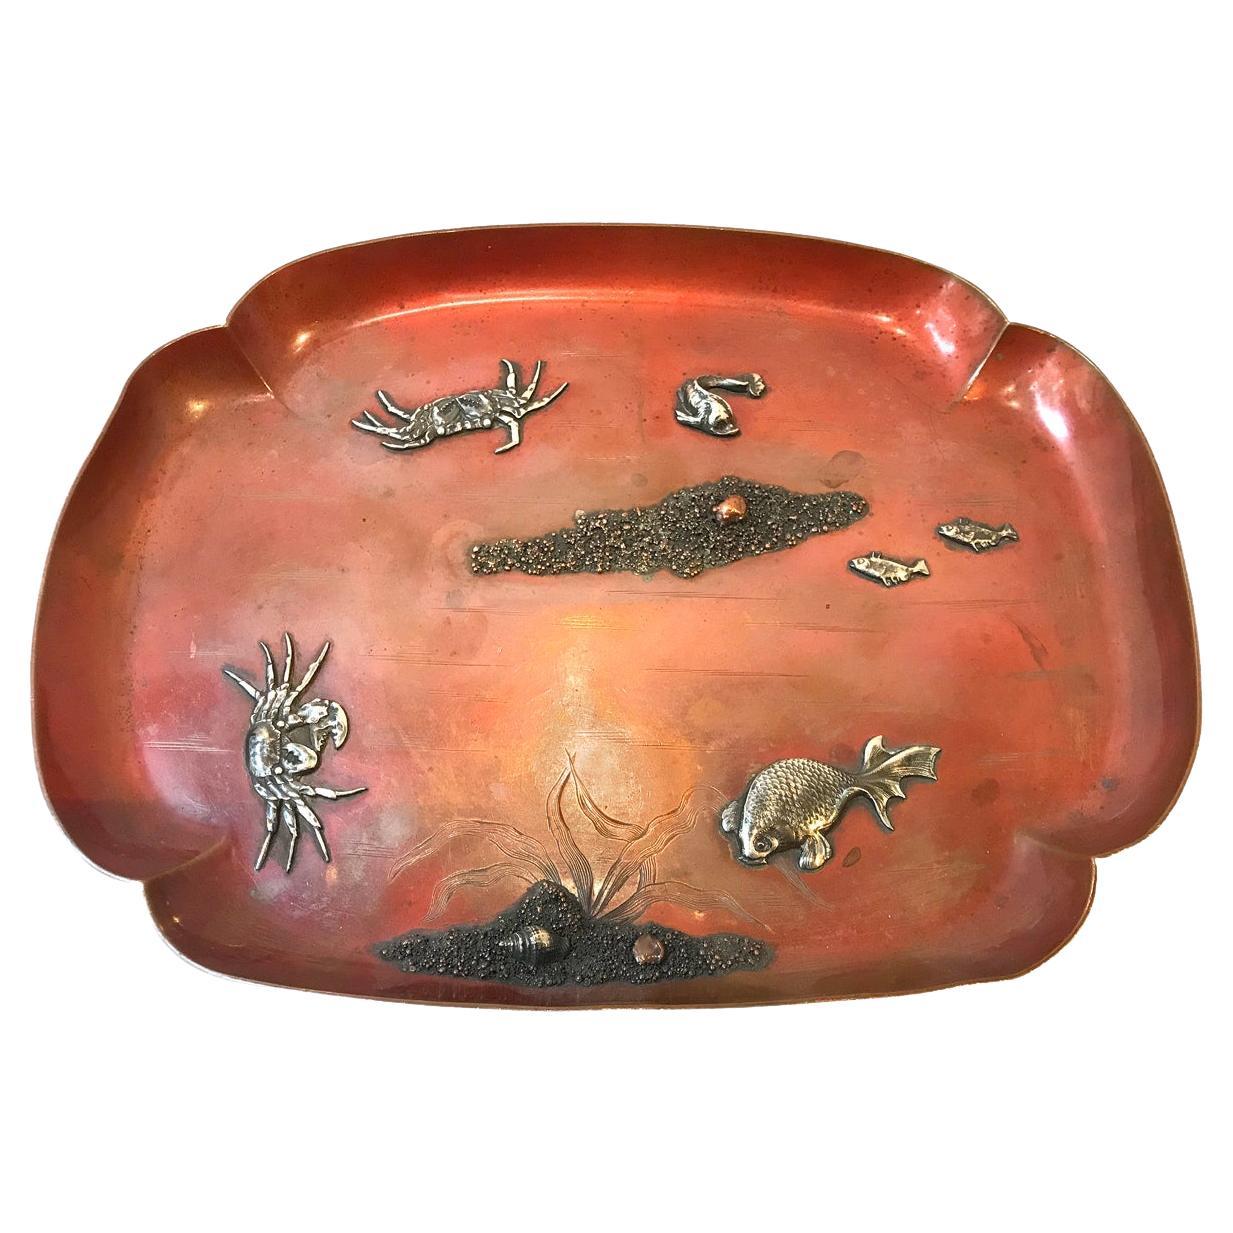 Gorham & Co Aesthetic Movement Tray with Crabs Made of Copper and Silver